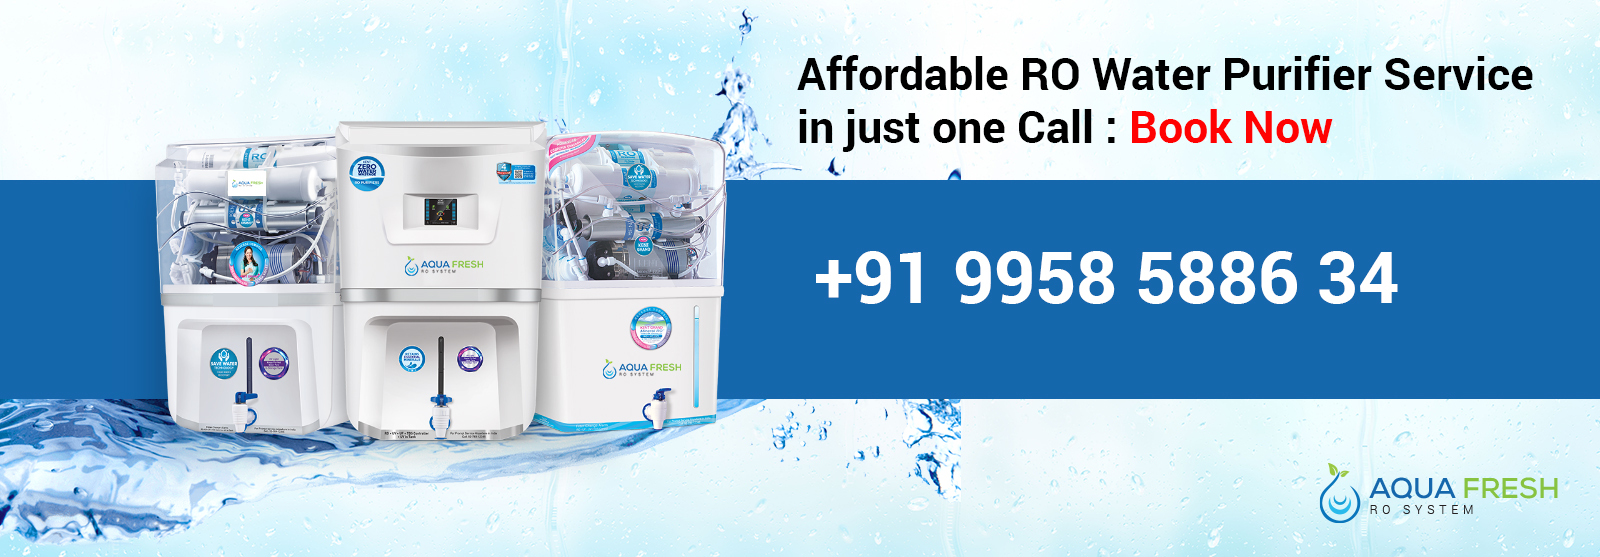 Best RO Services in affordable price